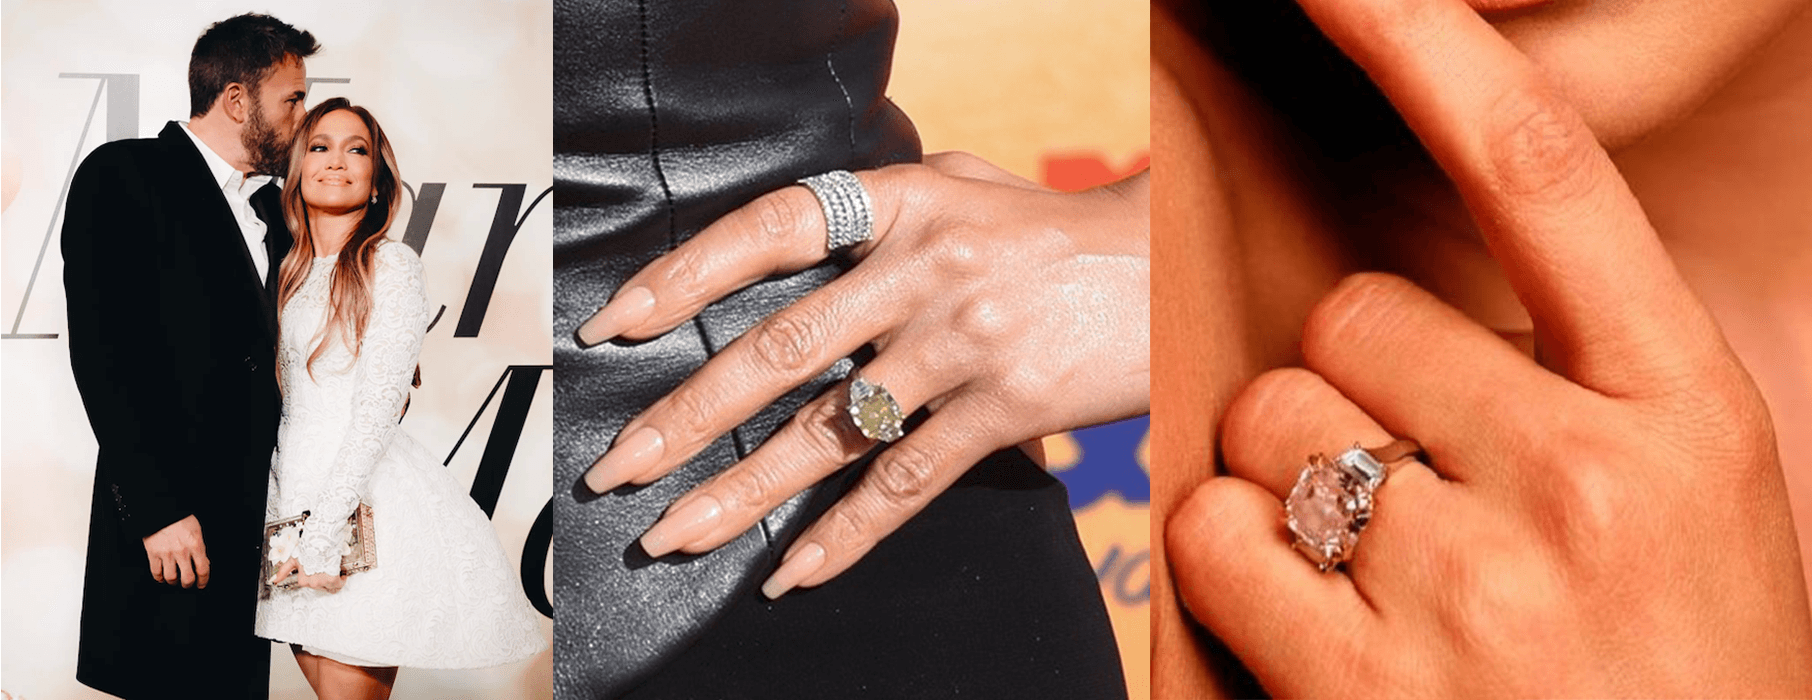 taking-cue-from-The-Duchess-of-Sussex-Meghan-married-women-are-upgrading-their-engagement-rings image1